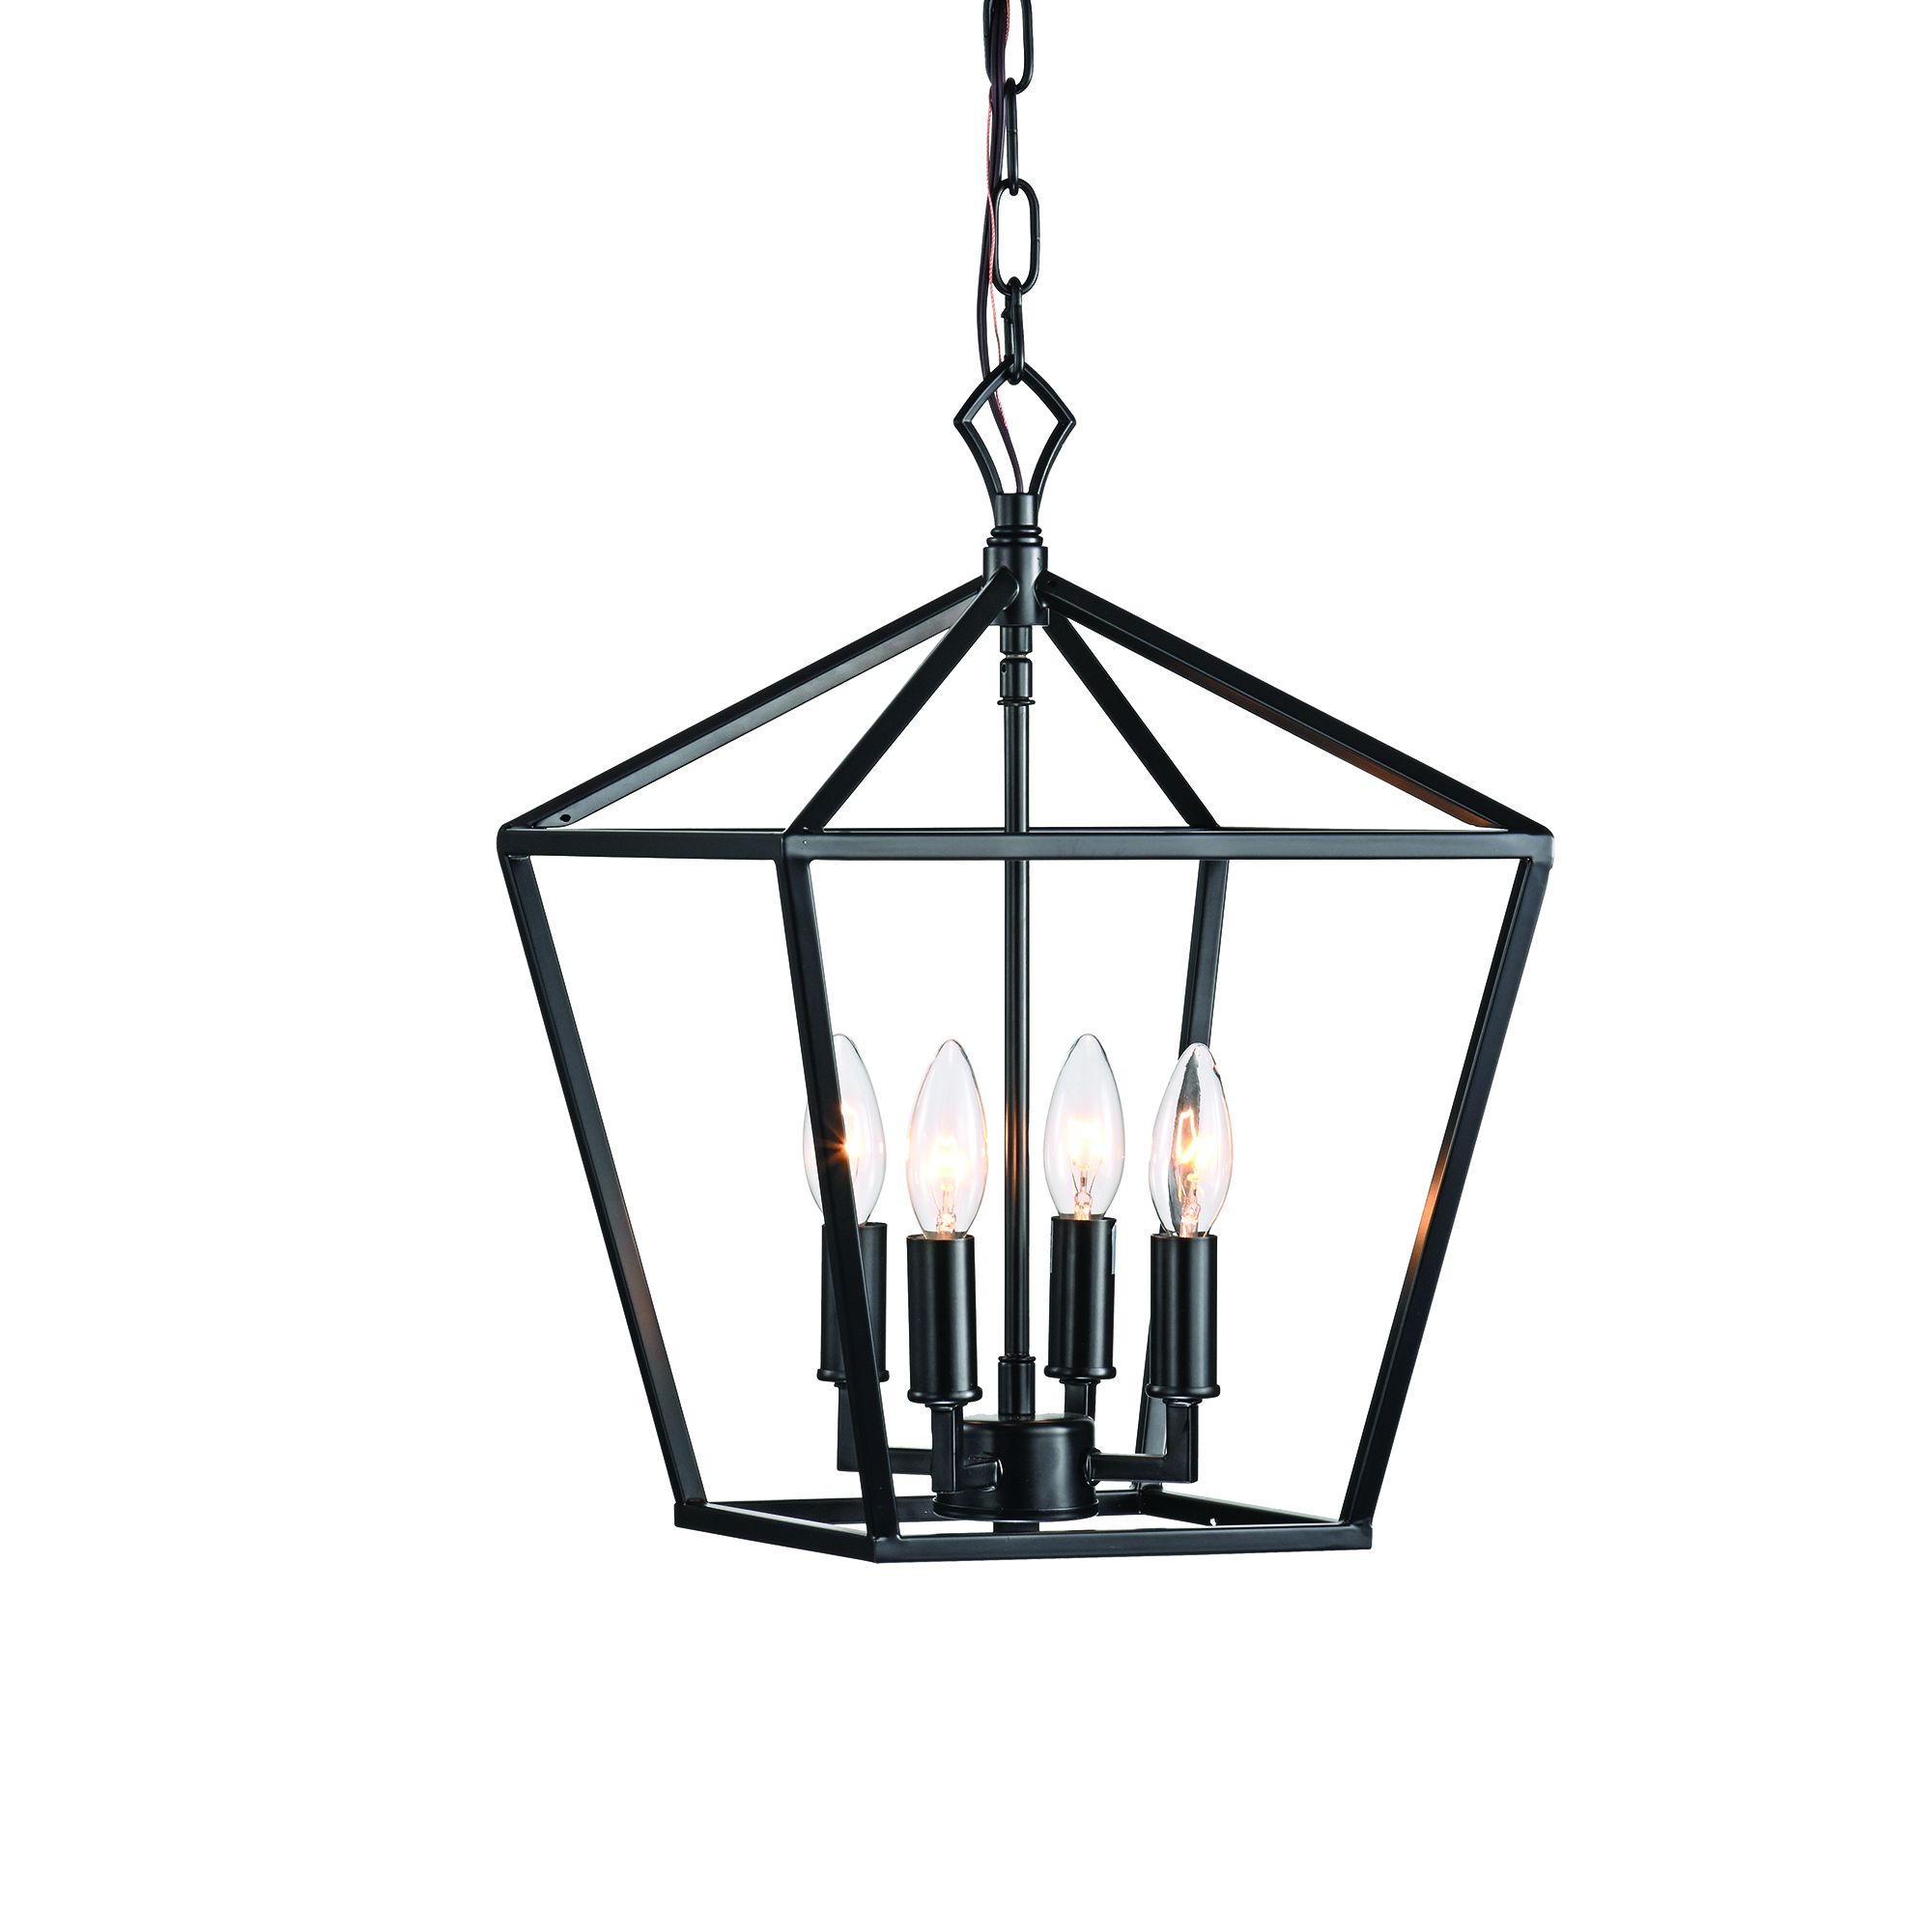 4 Light Matte Black Lantern Pendant Chandelier 12 In With With Best And Newest Matte Black Three Light Chandeliers (View 14 of 20)